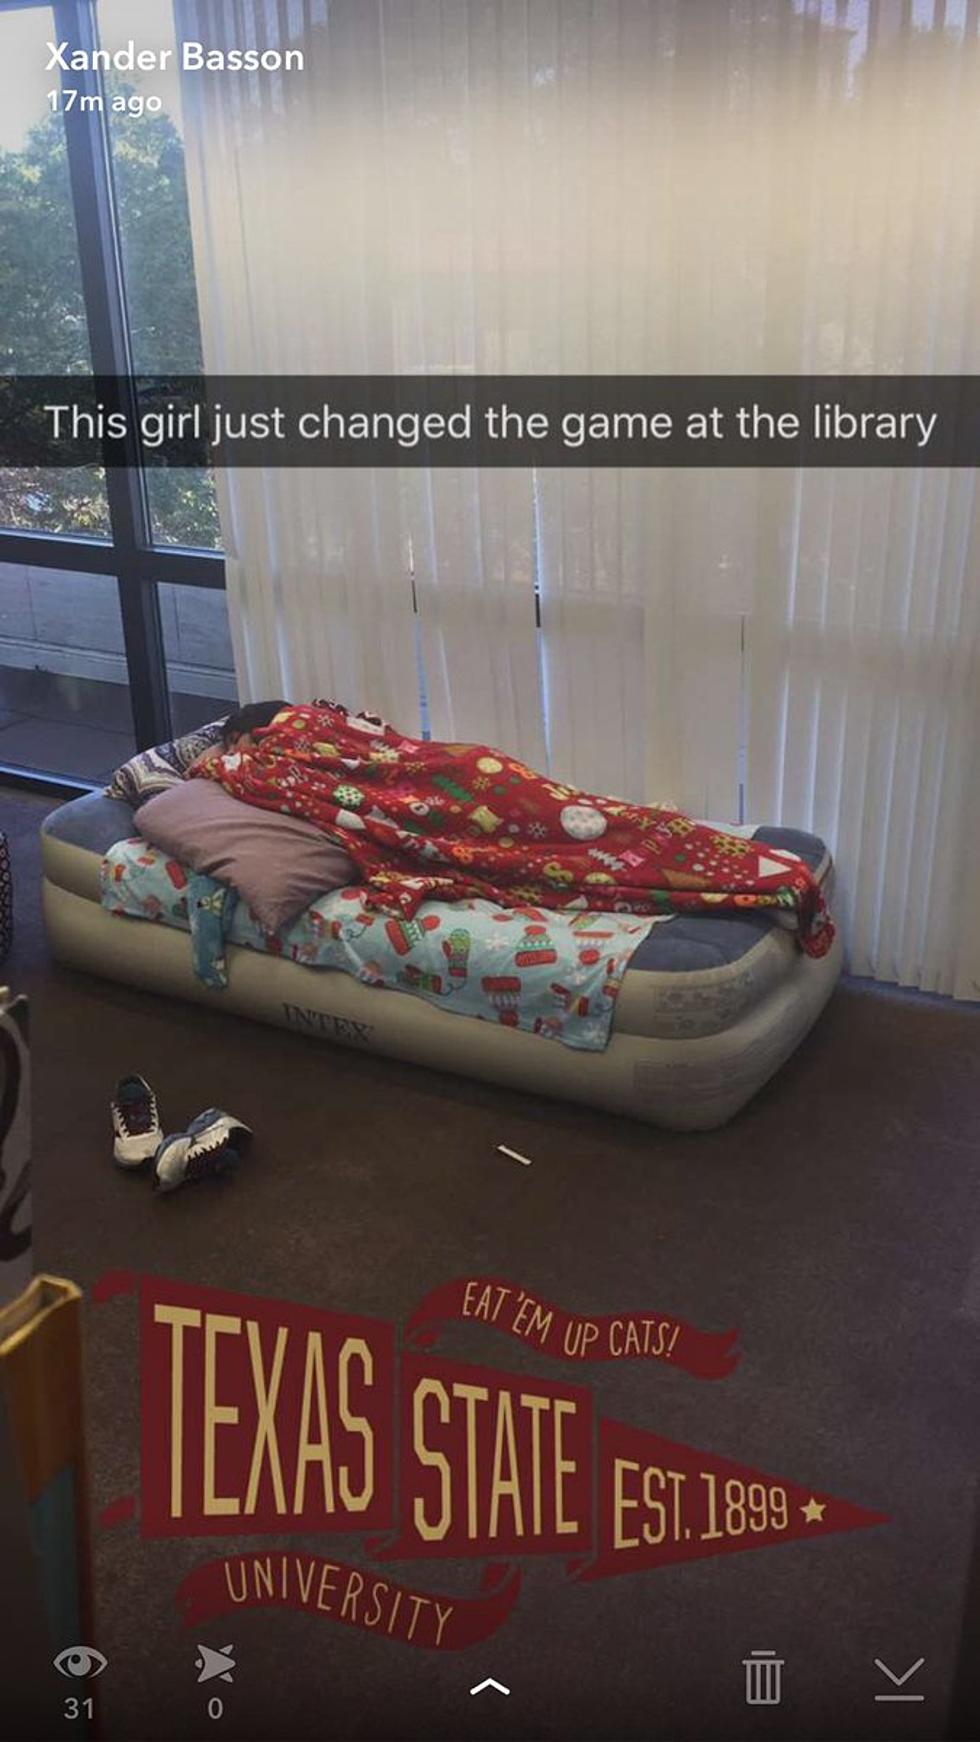 Texas State Student Brings Inflatable Mattress to Library for Finals Week [PHOTO]